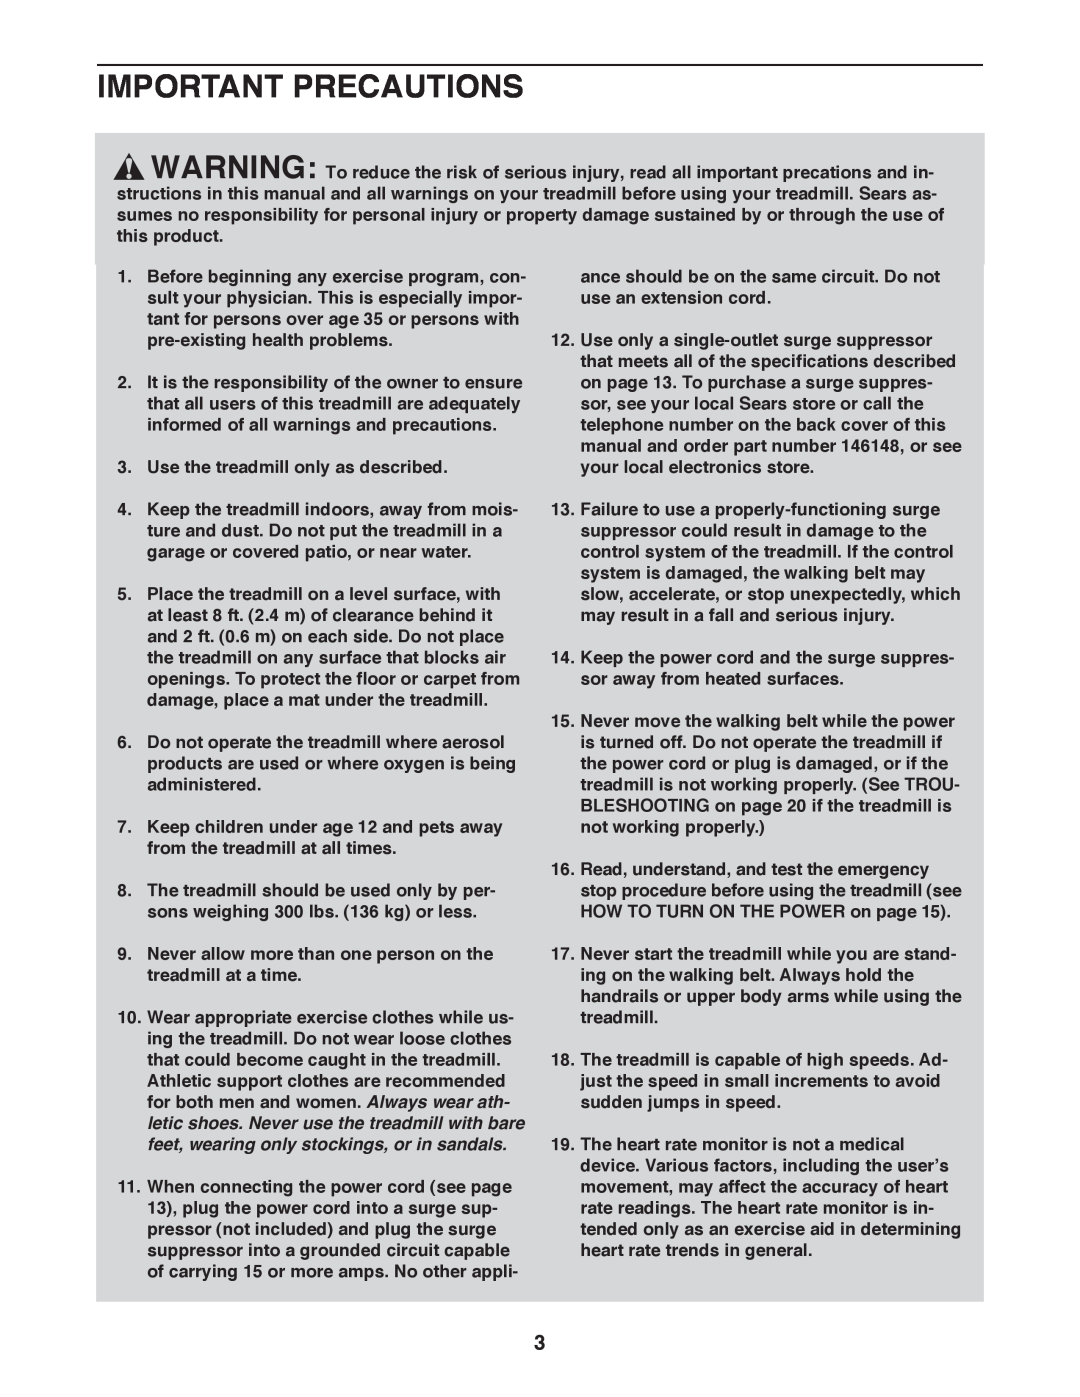 ProForm 397 user manual Important Precautions, Use the treadmill only as described, HOW TO TURN ON THE POWER on page 